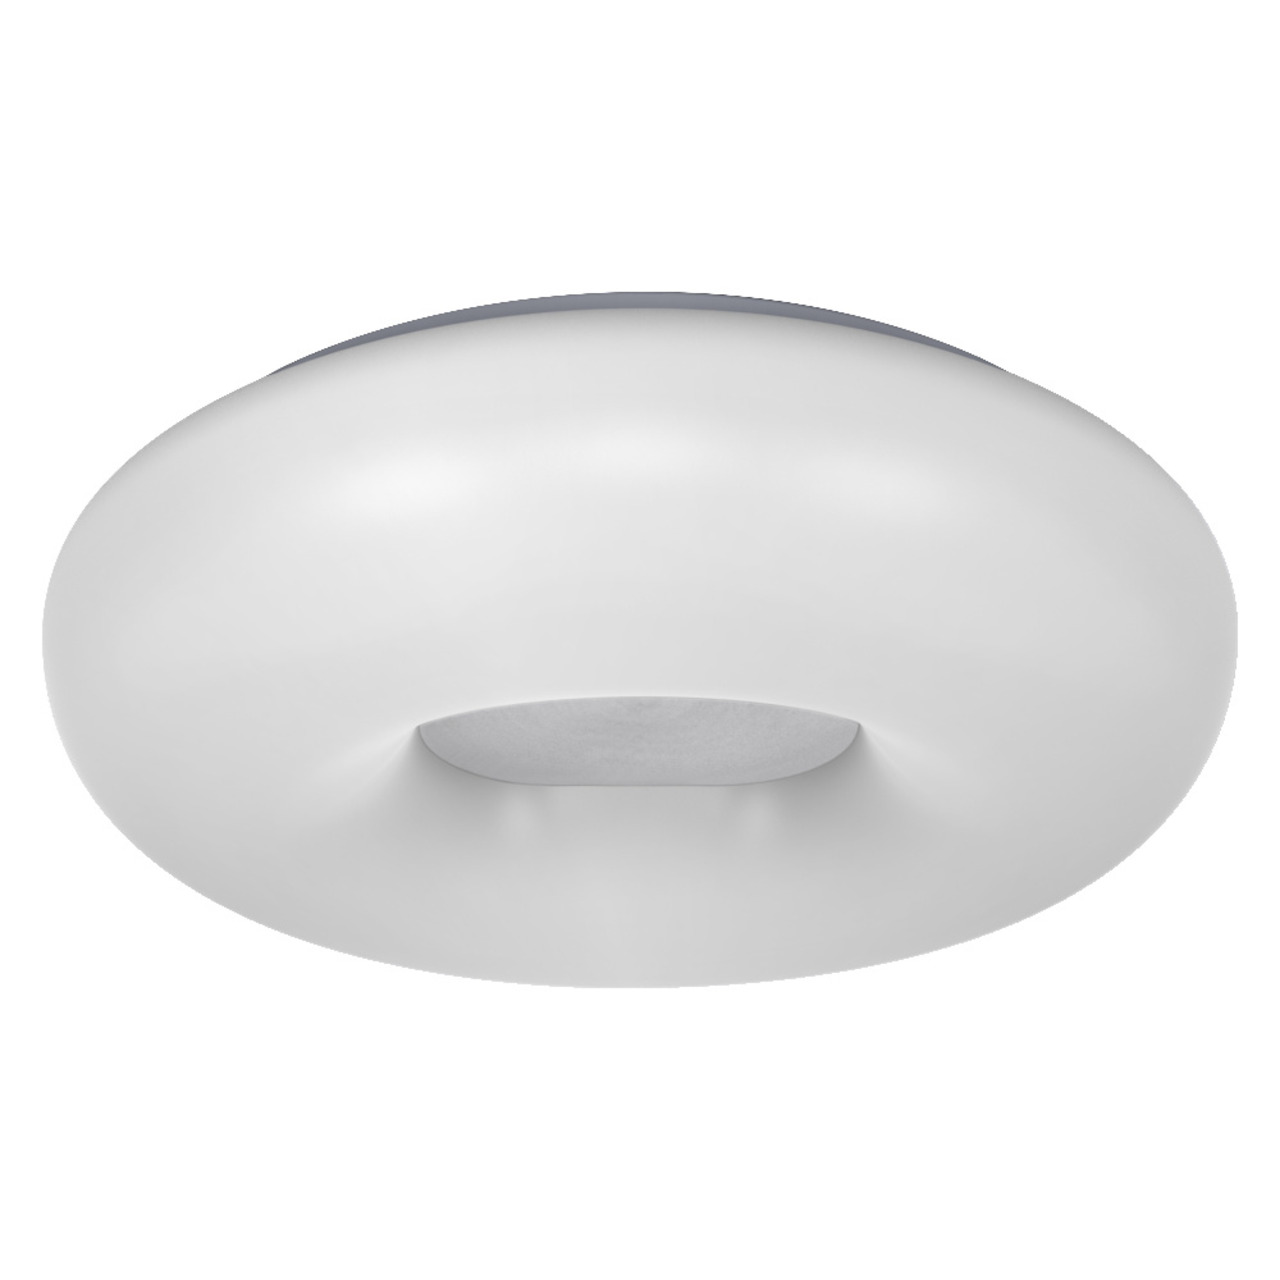 LEDVANCE SMART+ WiFi 26-W-LED-Deckenleuchte ORBIS DONUT- 2400 lm- Tunable White- dimmbar unter Beleuchtung